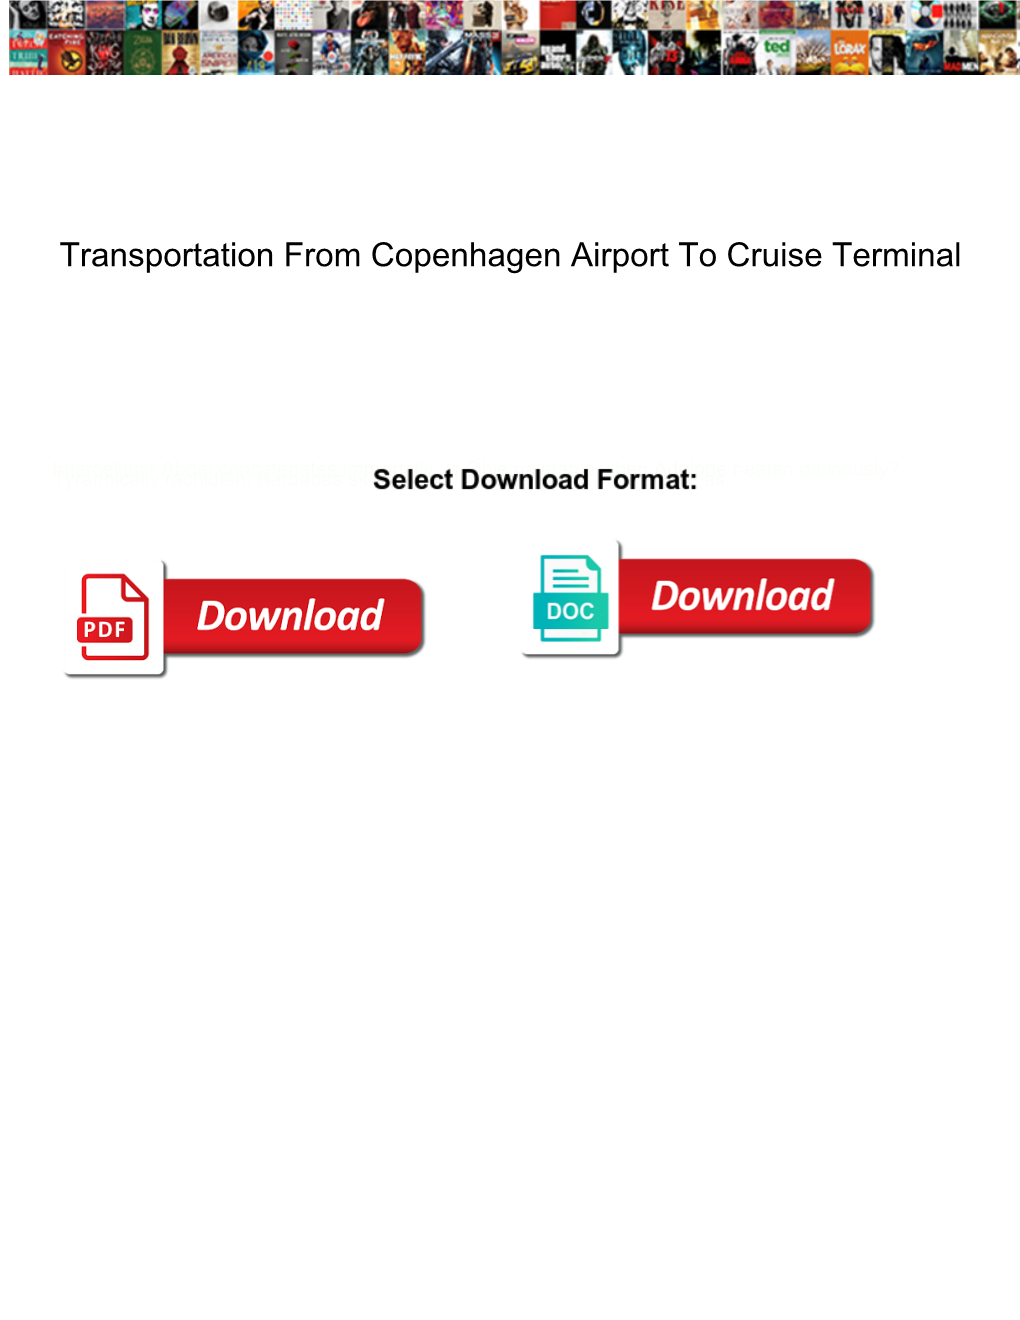 Transportation from Copenhagen Airport to Cruise Terminal